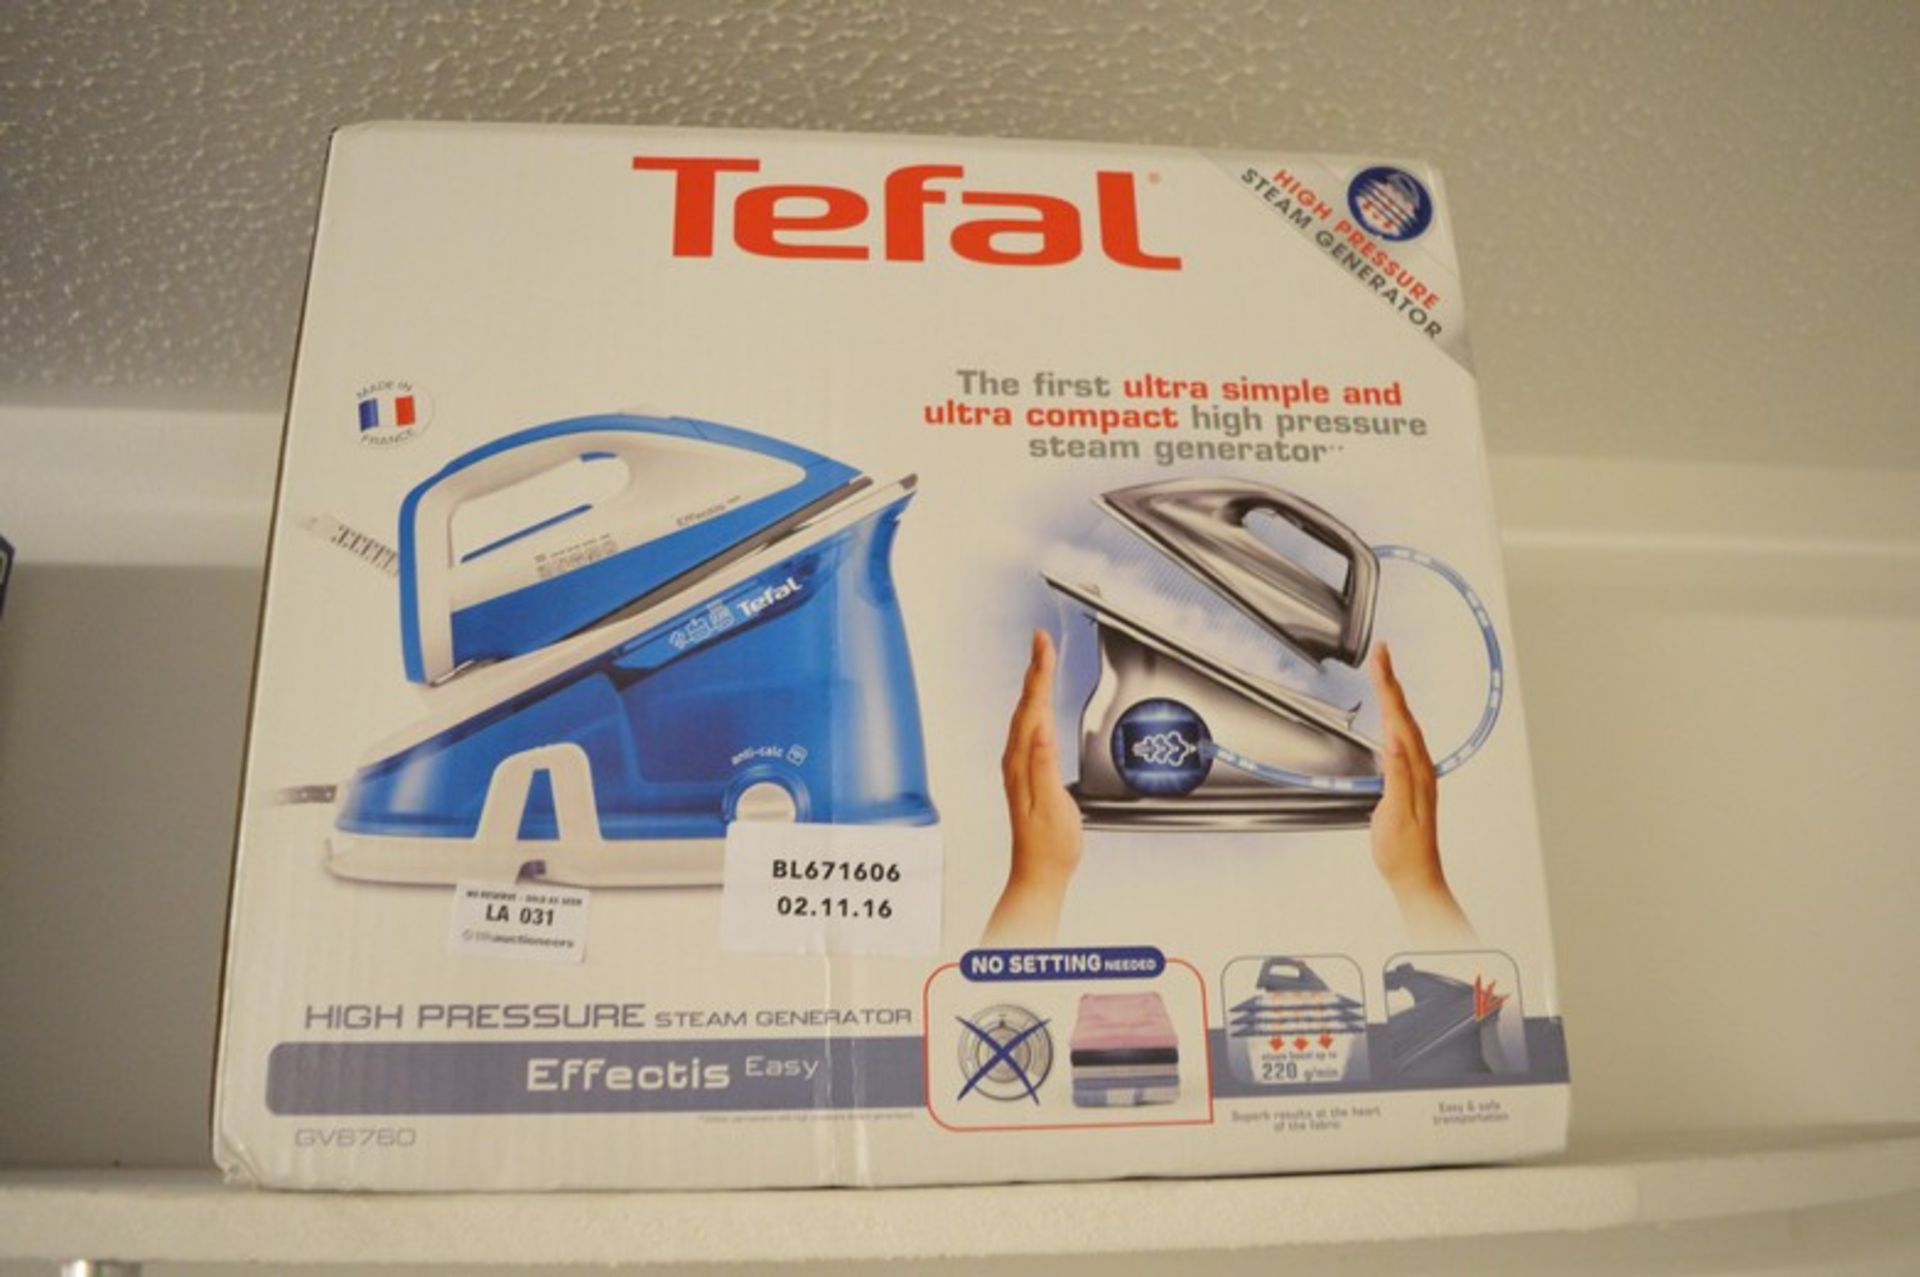 1 x BOXED TEFAL HIGH PRESSURE STEAM GENERATING IRON RRP £120 02.11.16 *PLEASE NOTE THAT THE BID